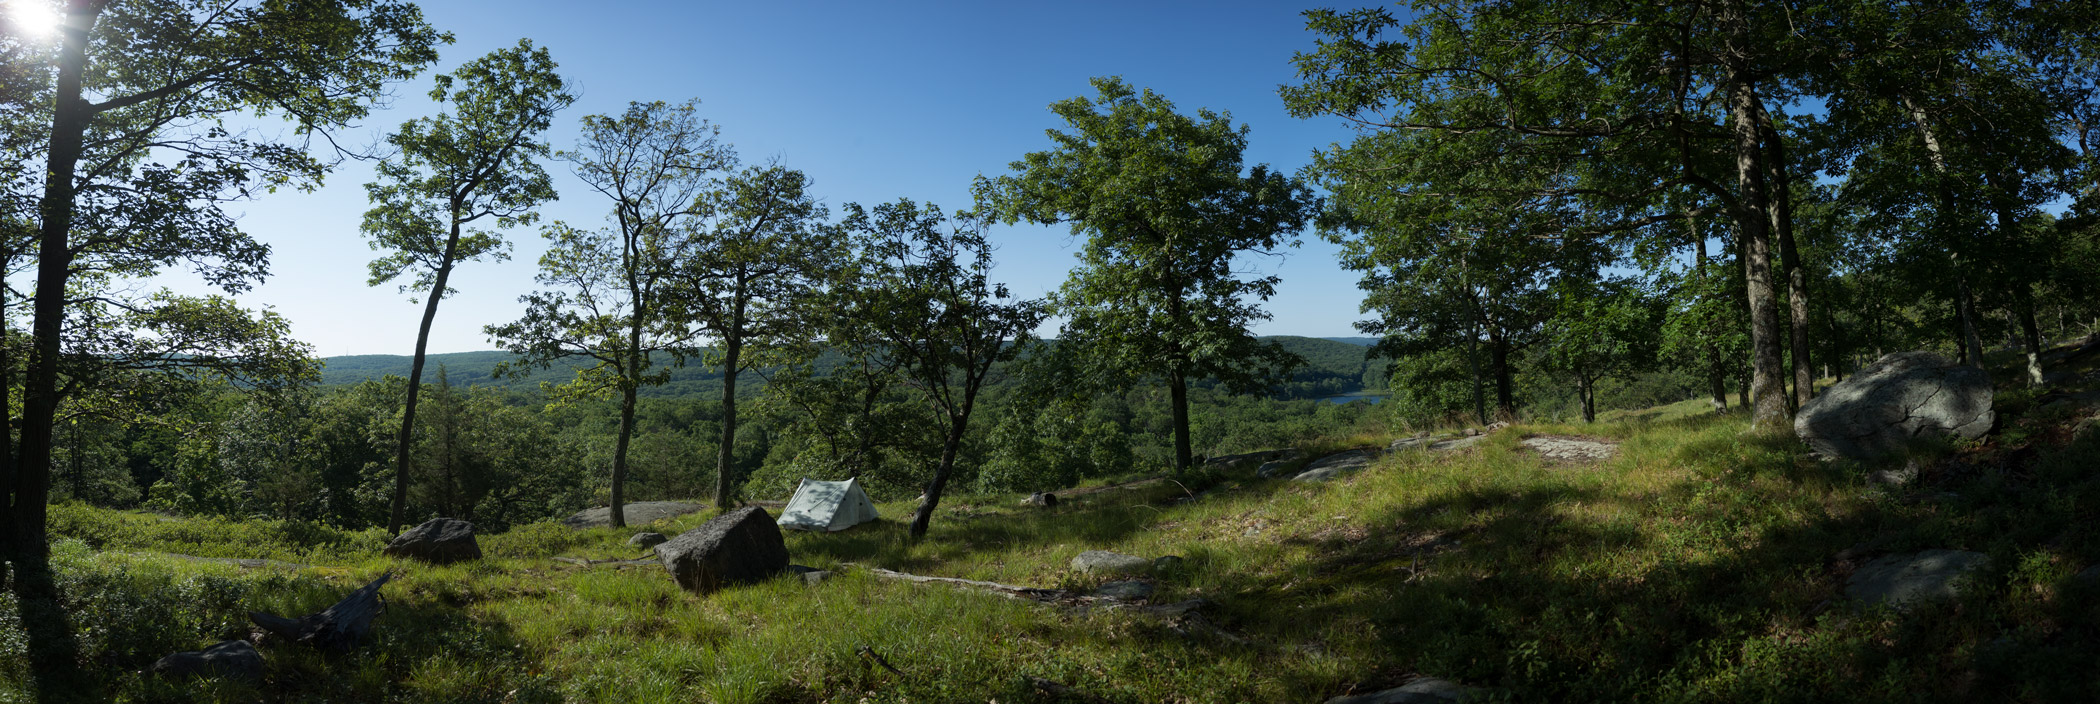 My "secret" camping spot in Harriman State Park in upstate New York.